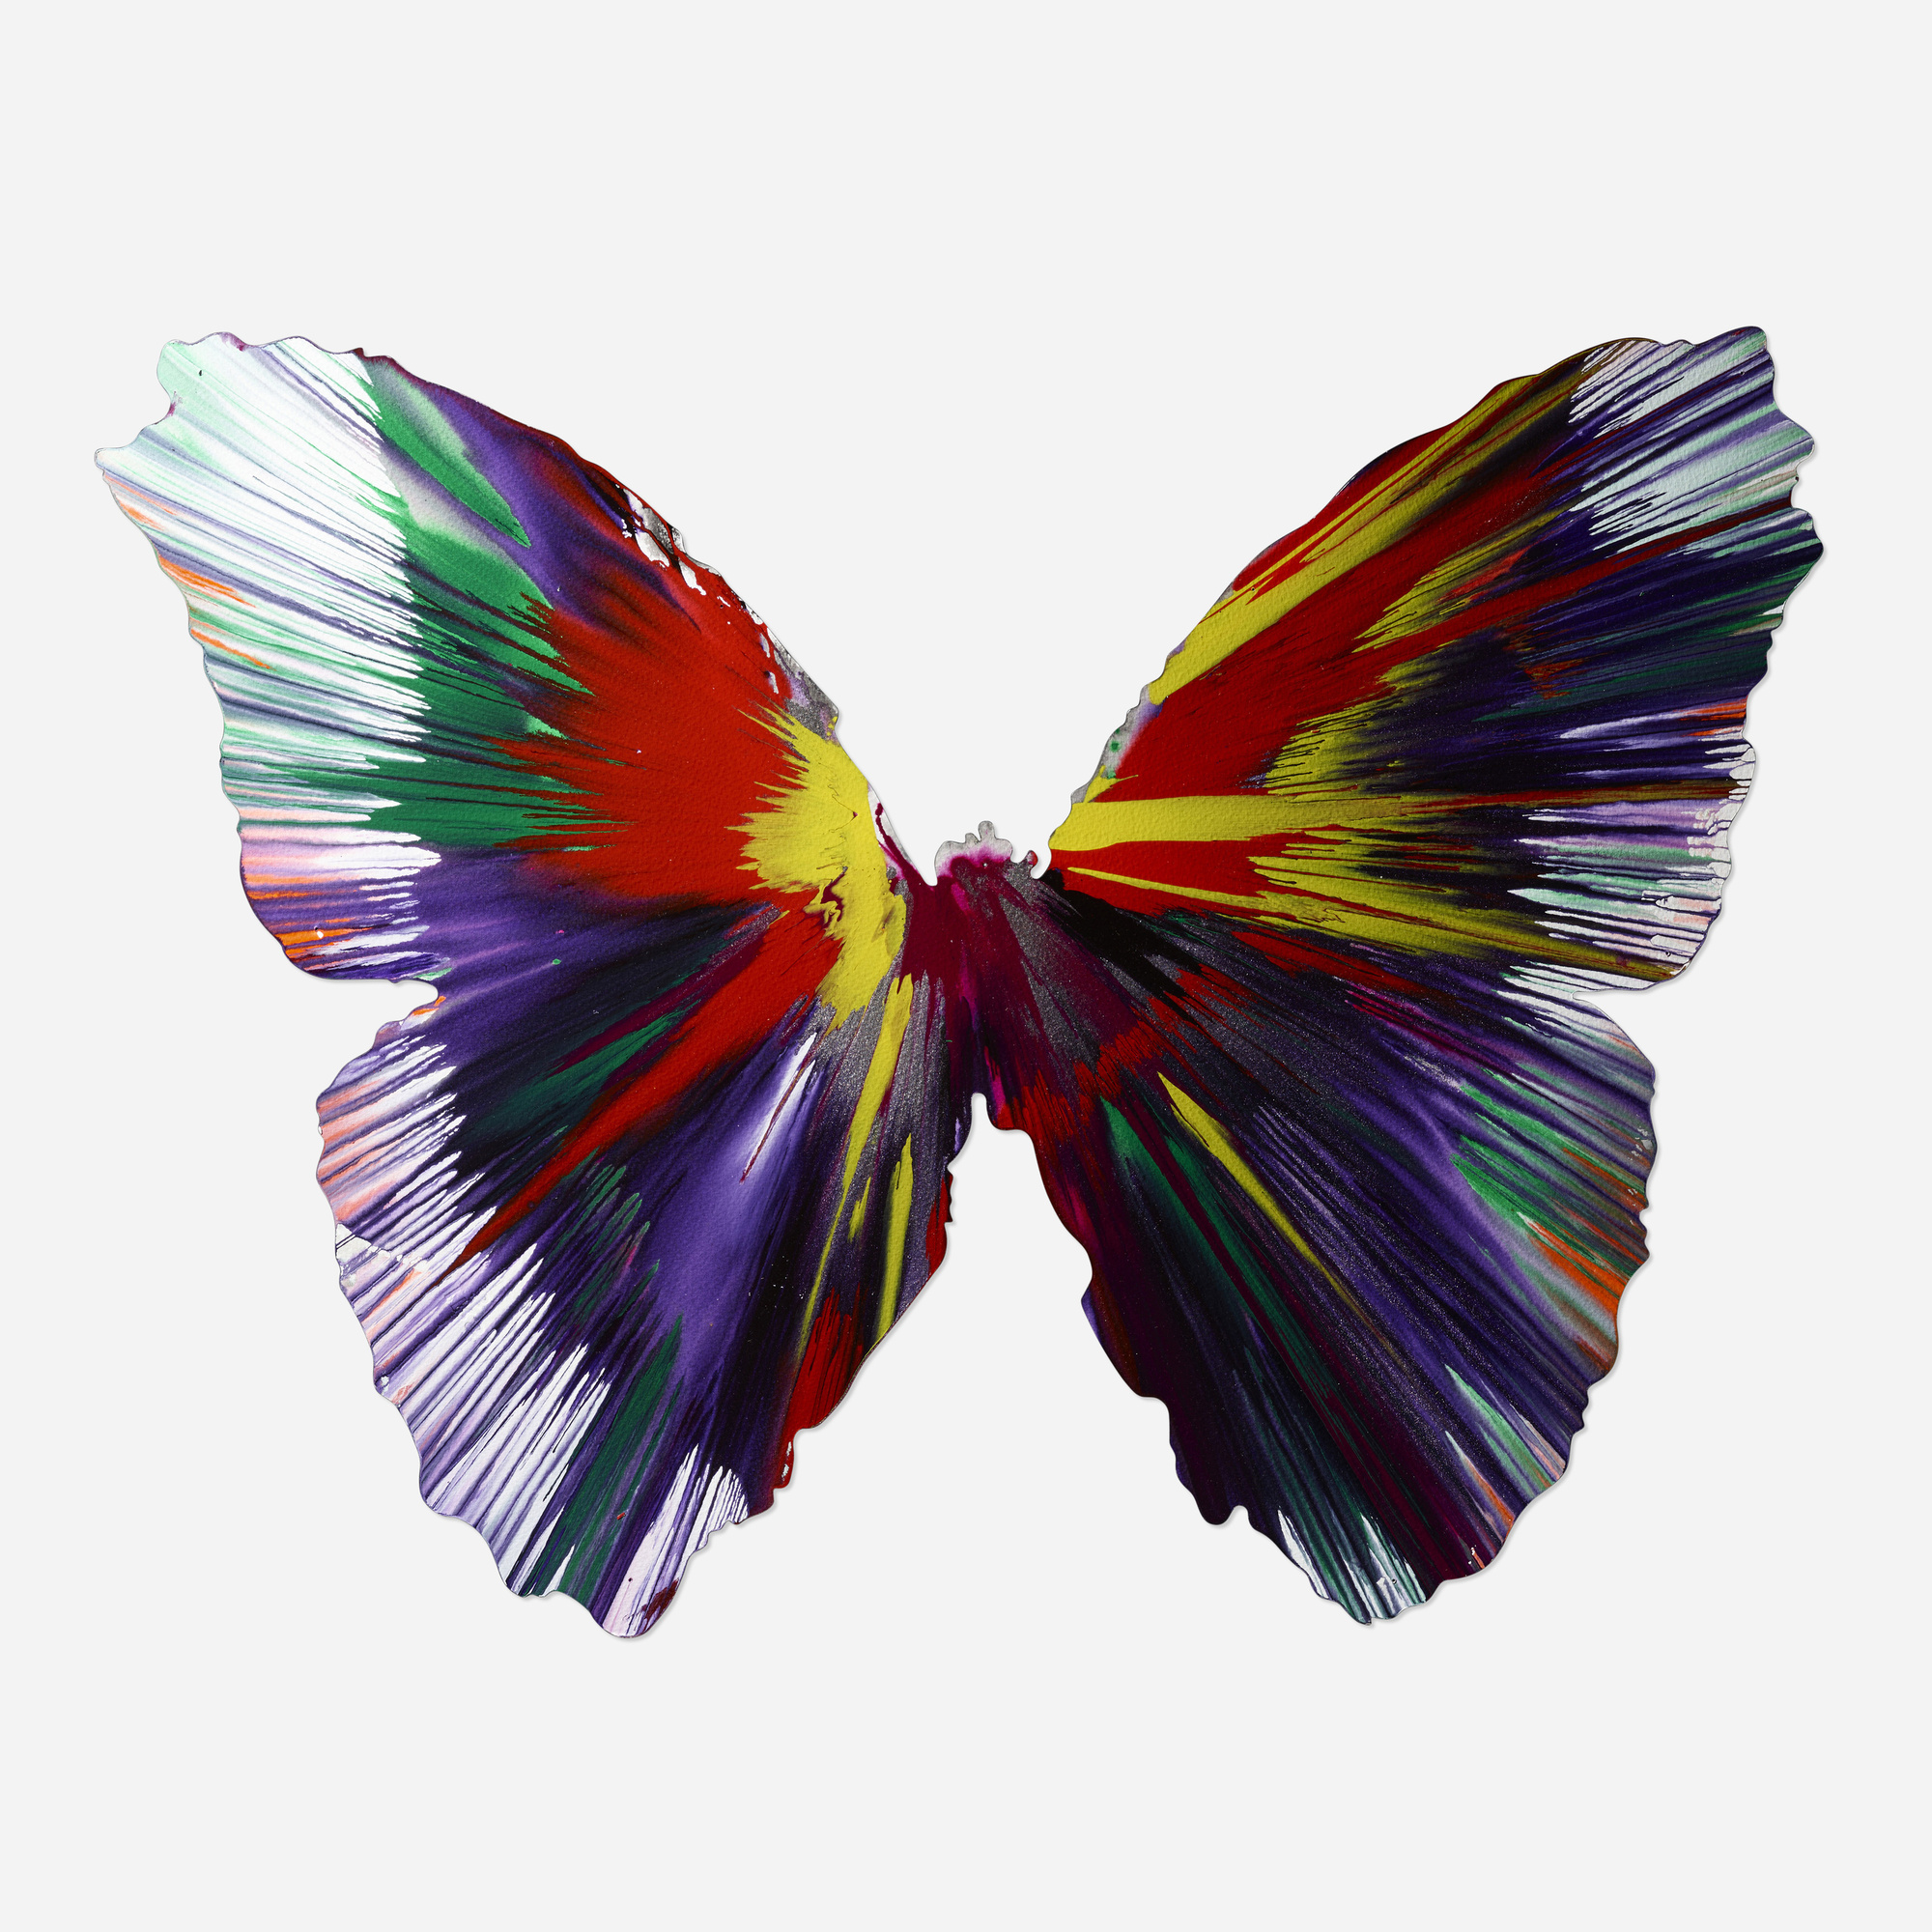 162: DAMIEN HIRST, Signed Butterfly Spin Painting < 20|21 Art, 29 